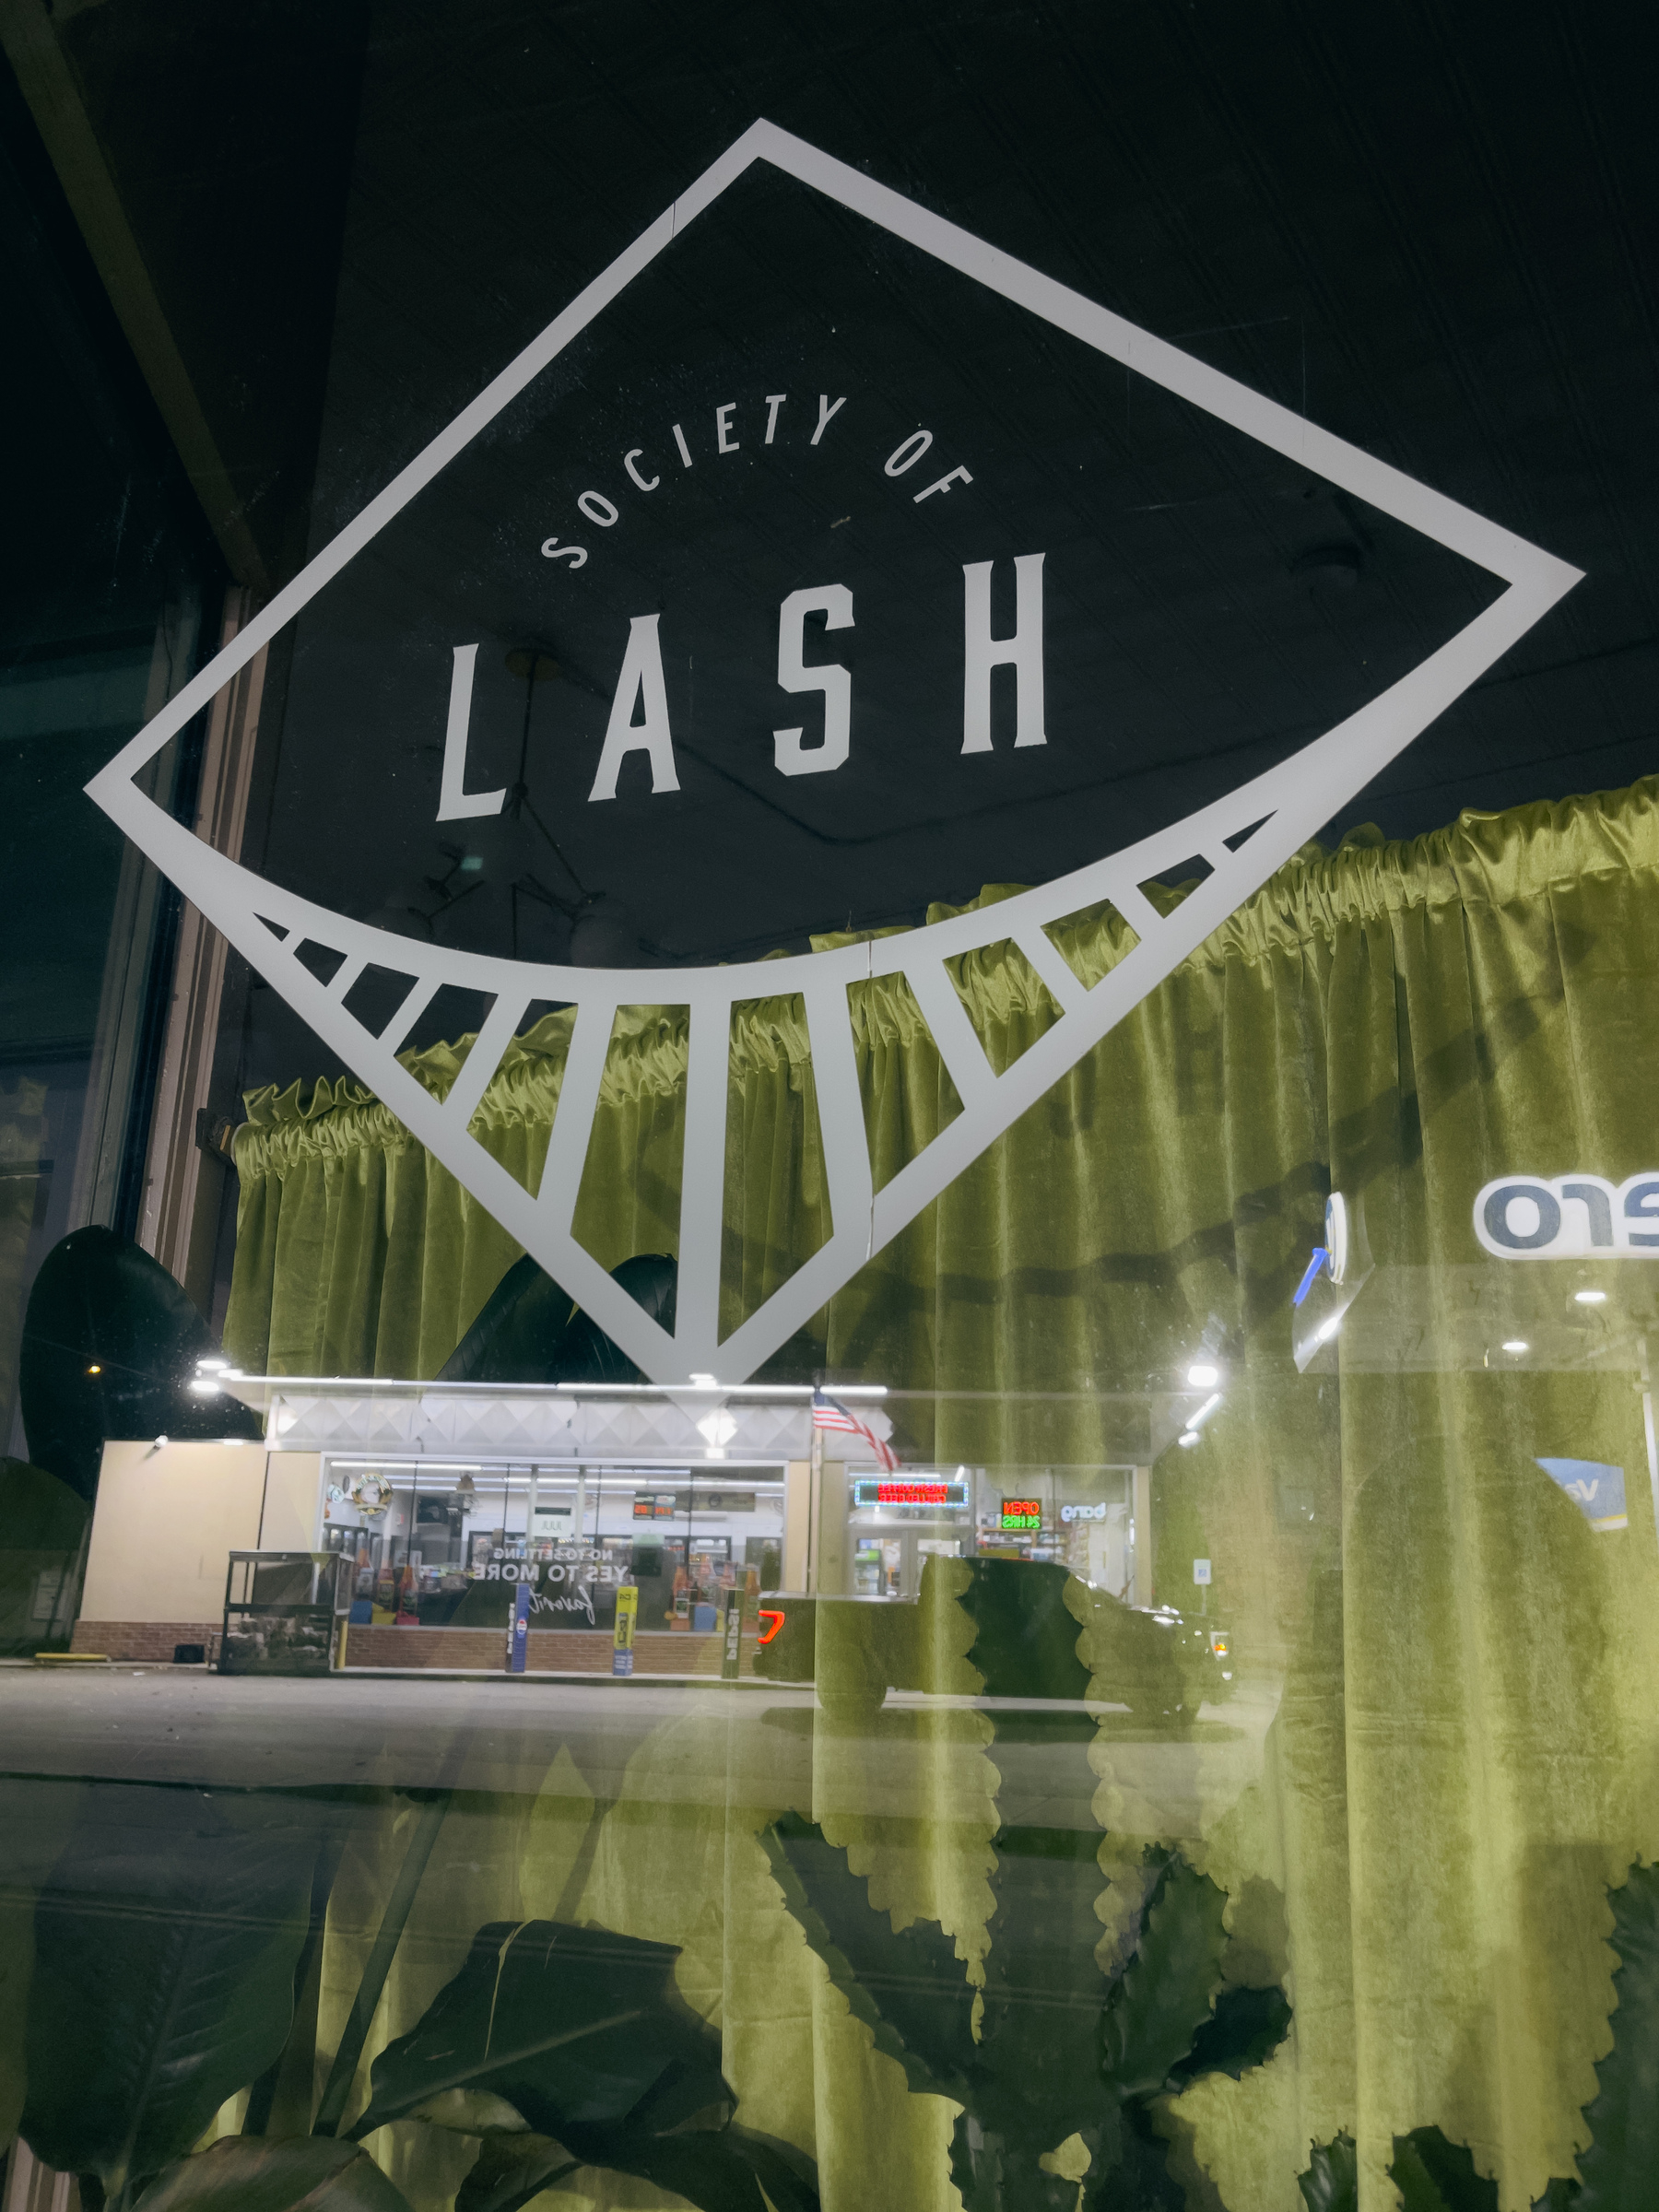 Society of Lash window graphic with gas station reflection overlaid.